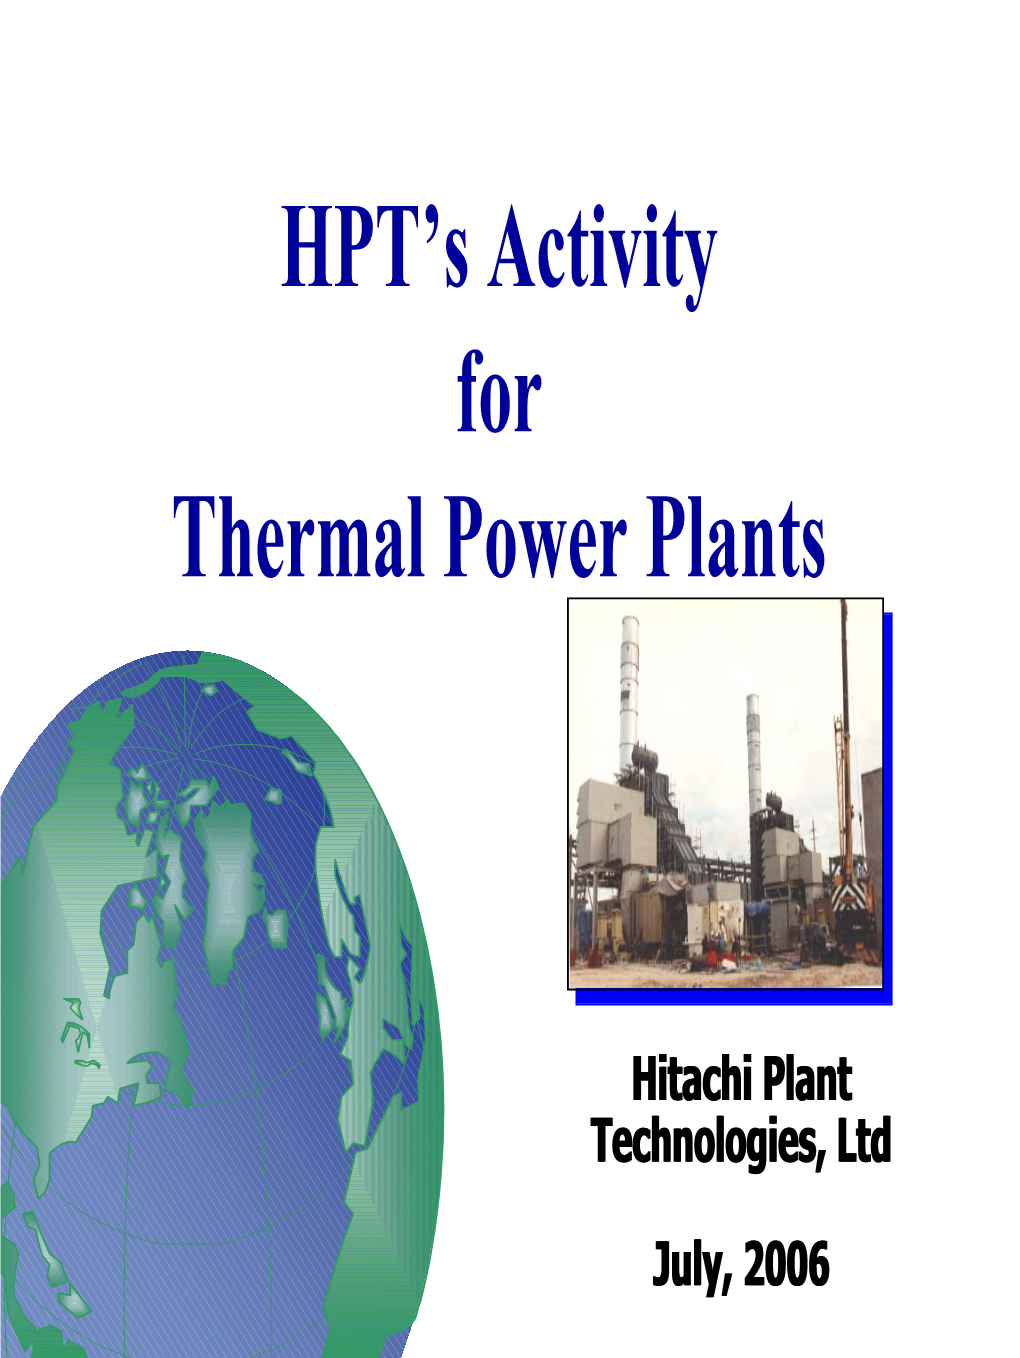 Hitachi Plant Technologies 2 Typetype Ofof Projectproject